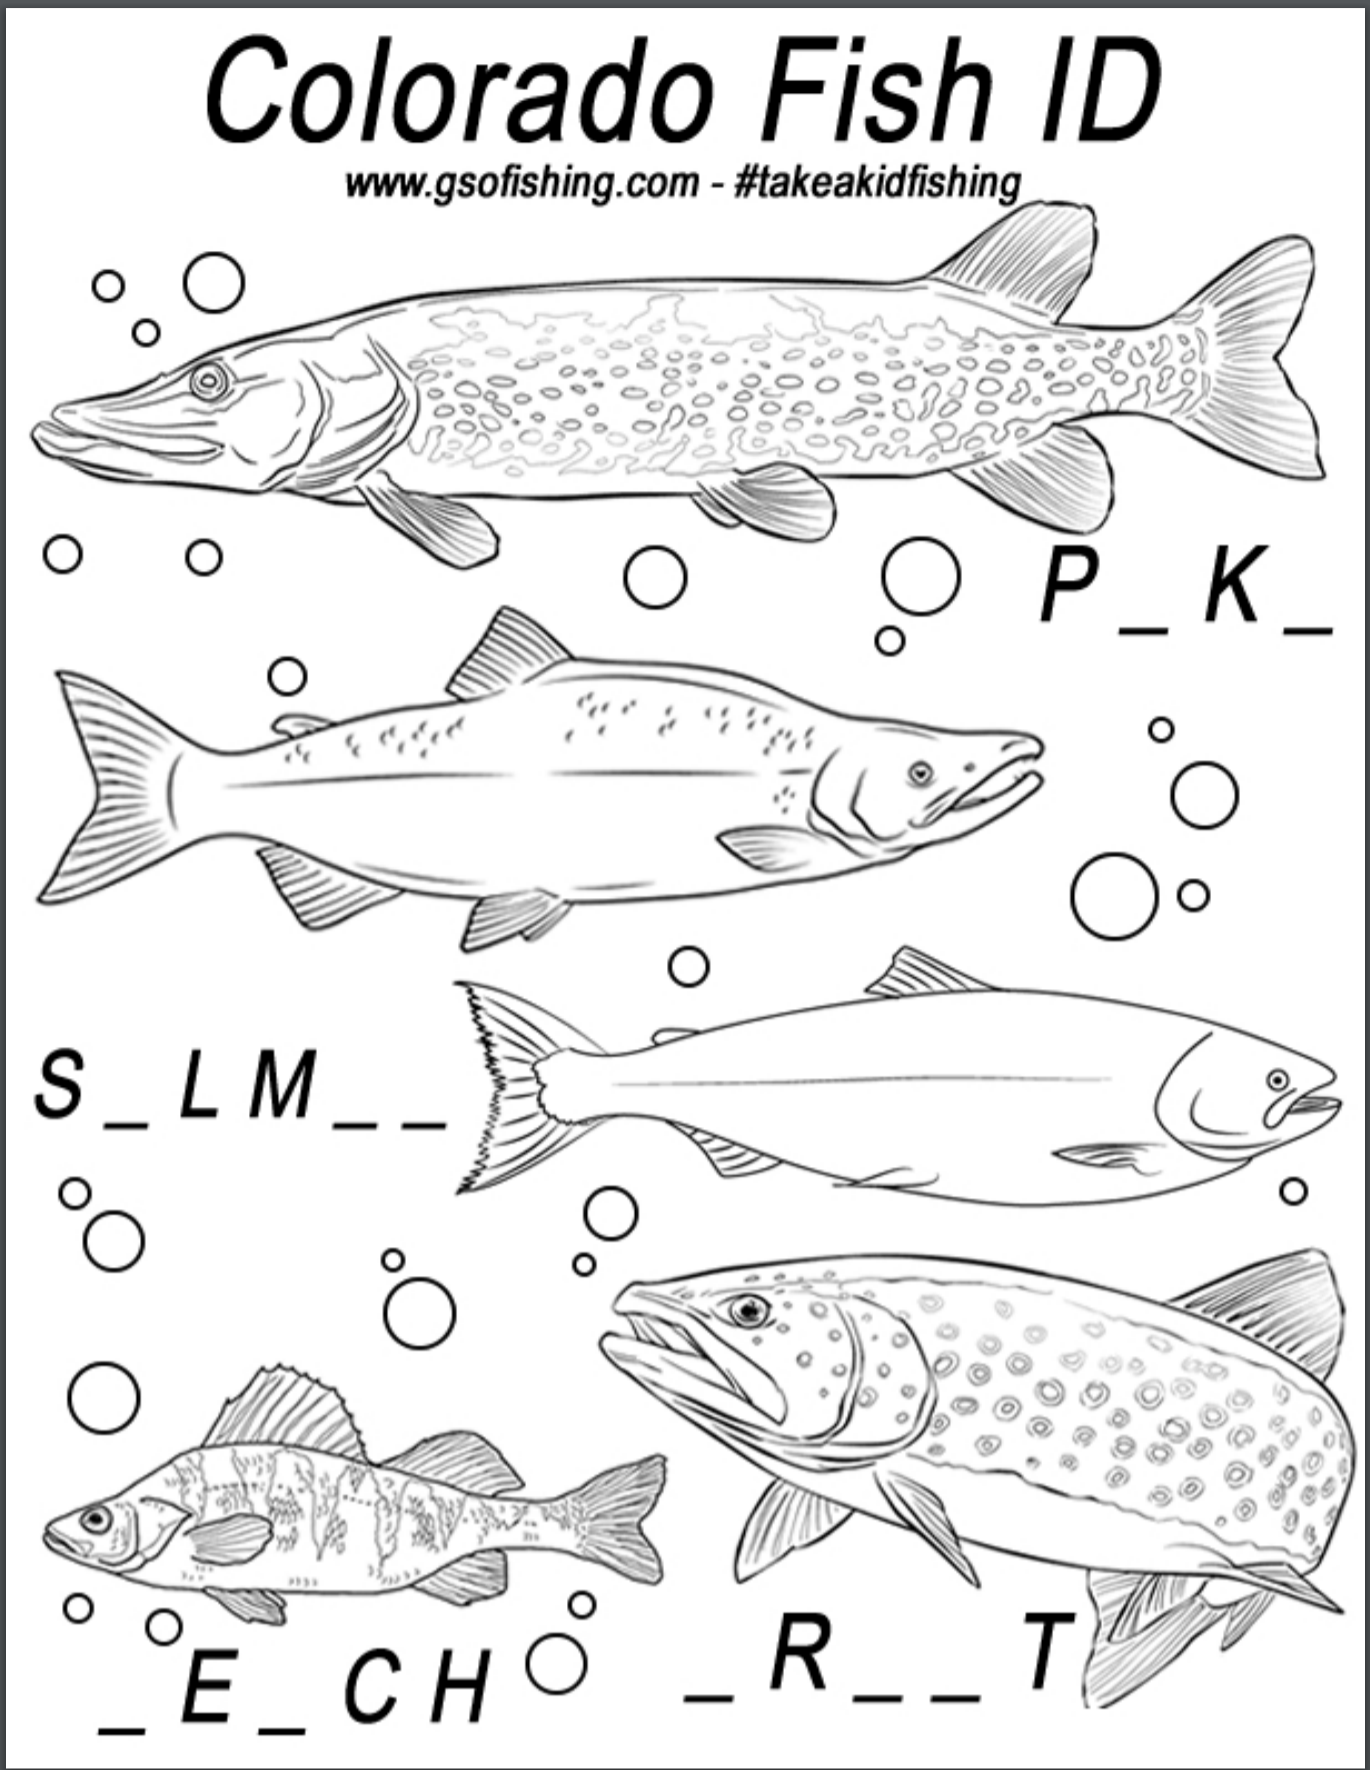 GSO Fishing - Premium Guided Trips & Lures - Colorado Fish ID Coloring Sheet